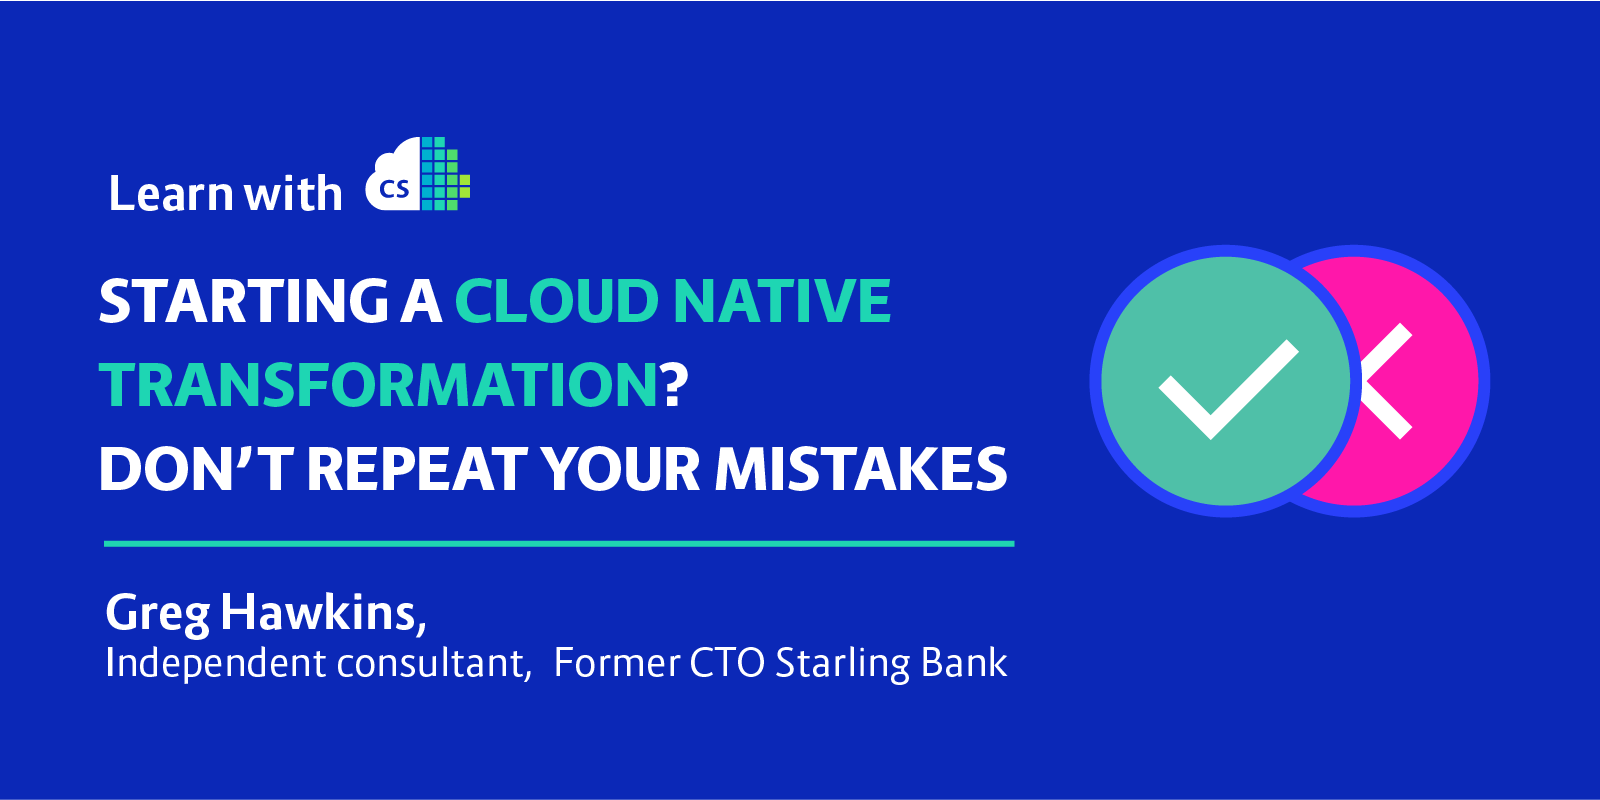 Starting a Cloud Native Transformation? Don’t Repeat Your Mistakes